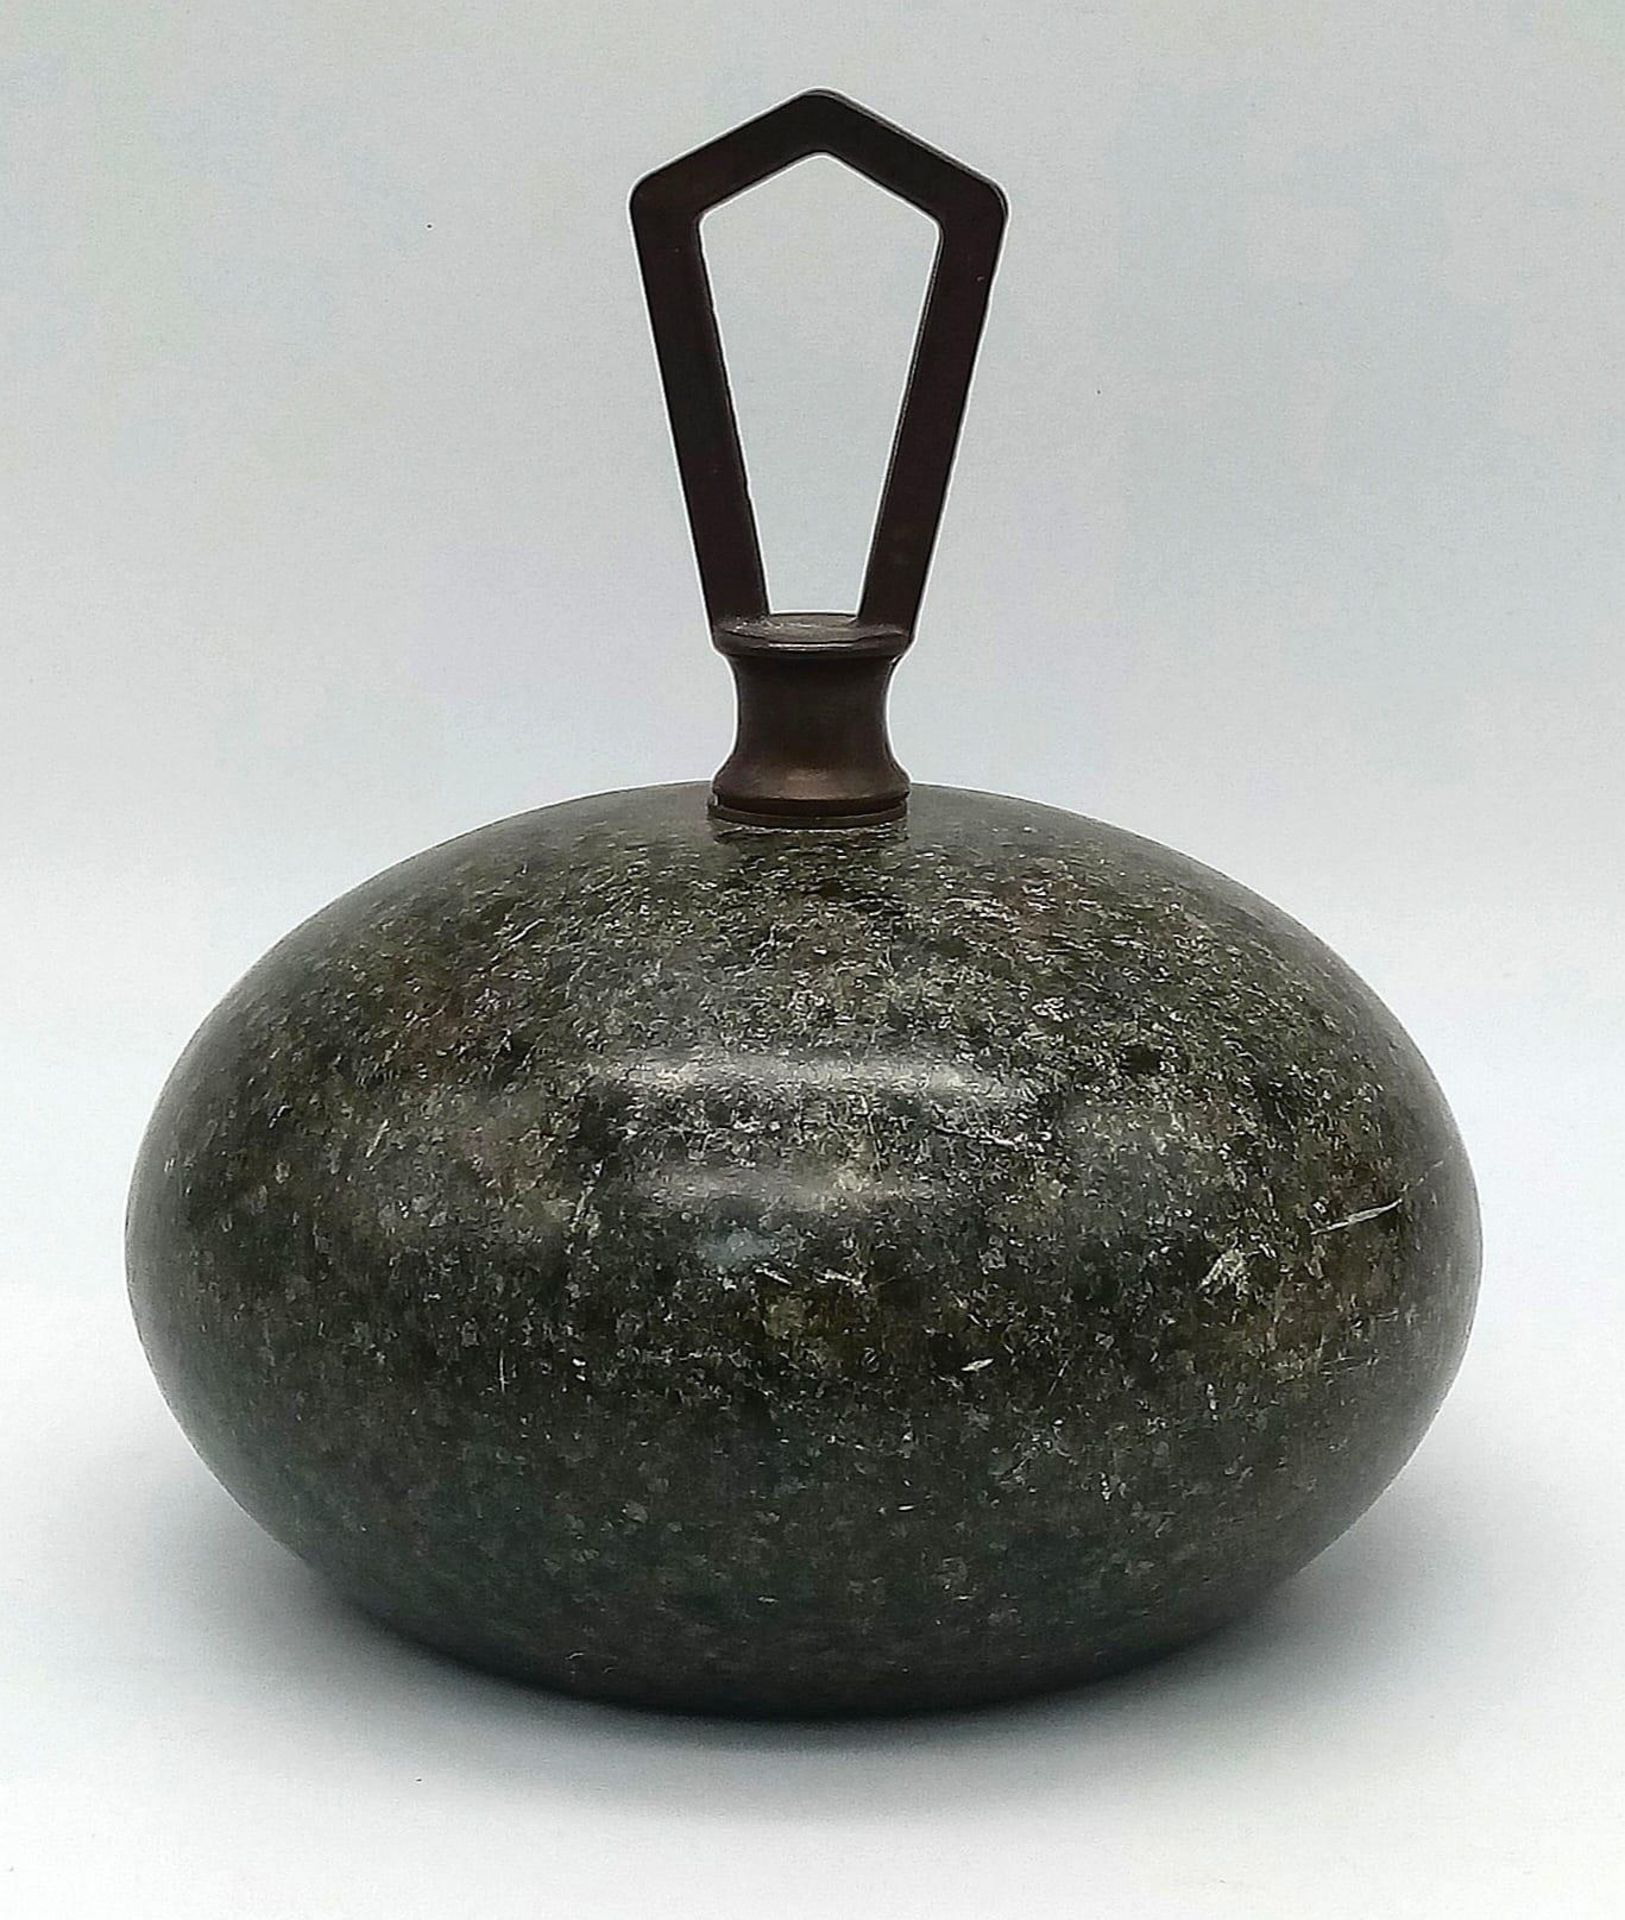 A Vintage Granite Small Curling Stone! The perfect paperweight. 14cm x 16cm. Made by Nigel Owen.